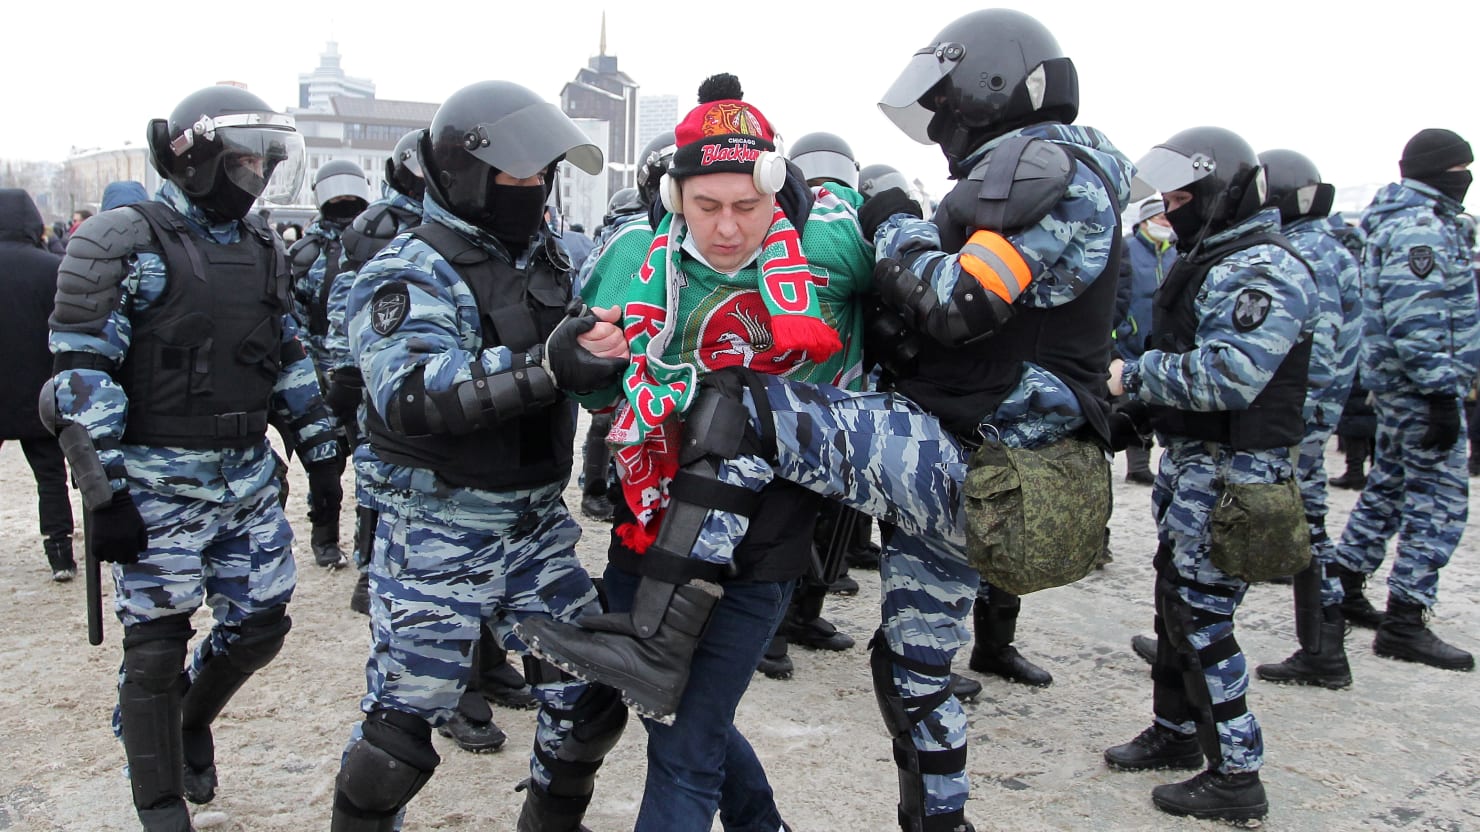 More than 3,200 arrested in pro-Navalny protests in Russia